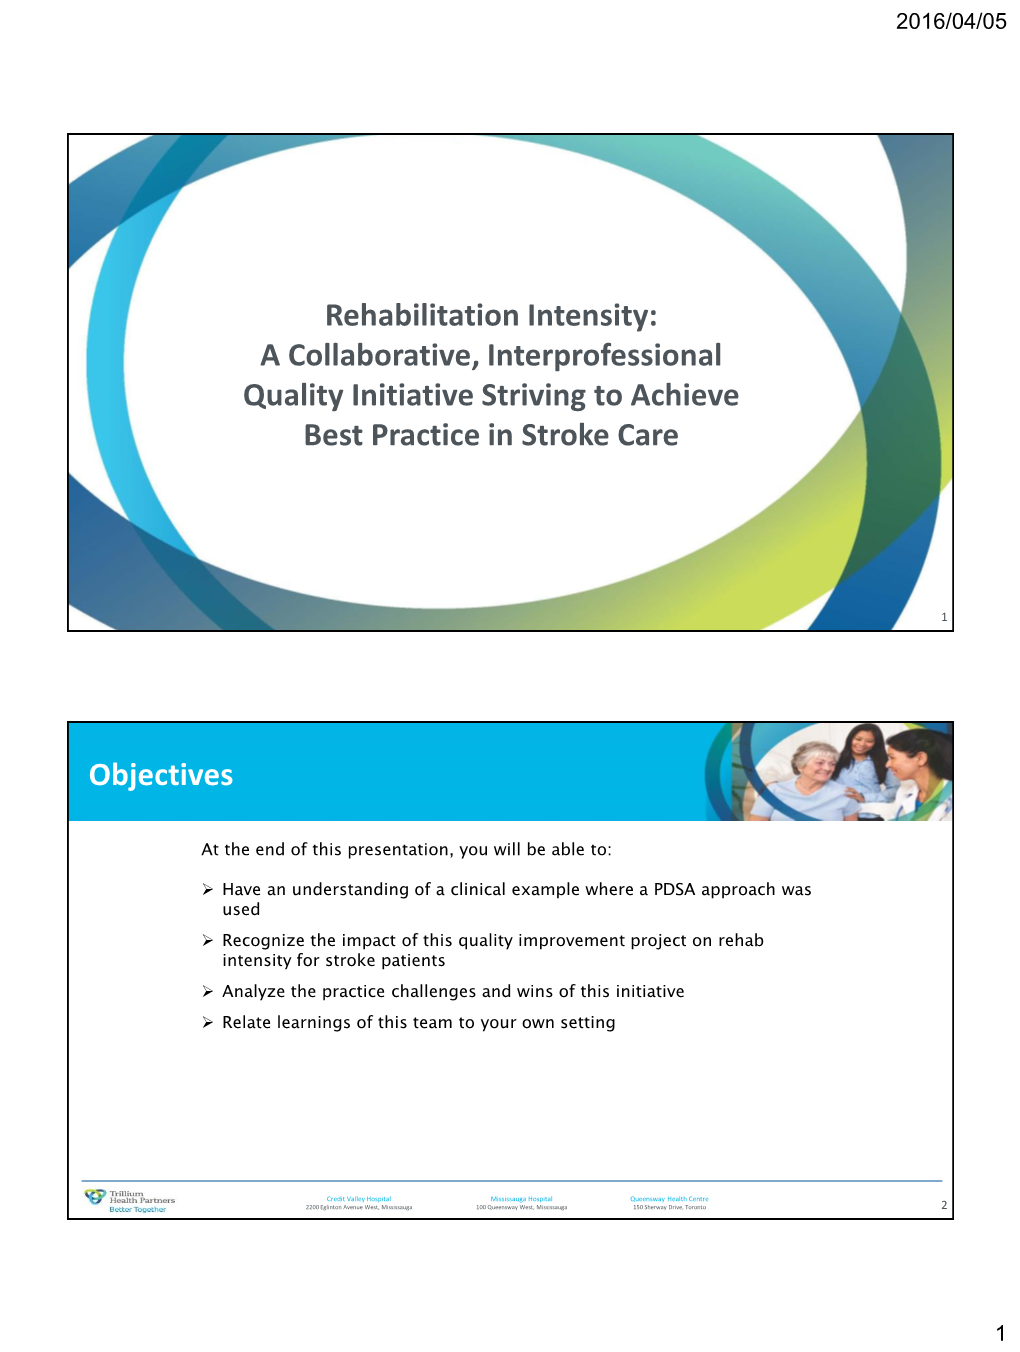 Rehabilitation Intensity: a Collaborative, Interprofessional Quality Initiative Striving to Achieve Best Practice in Stroke Care